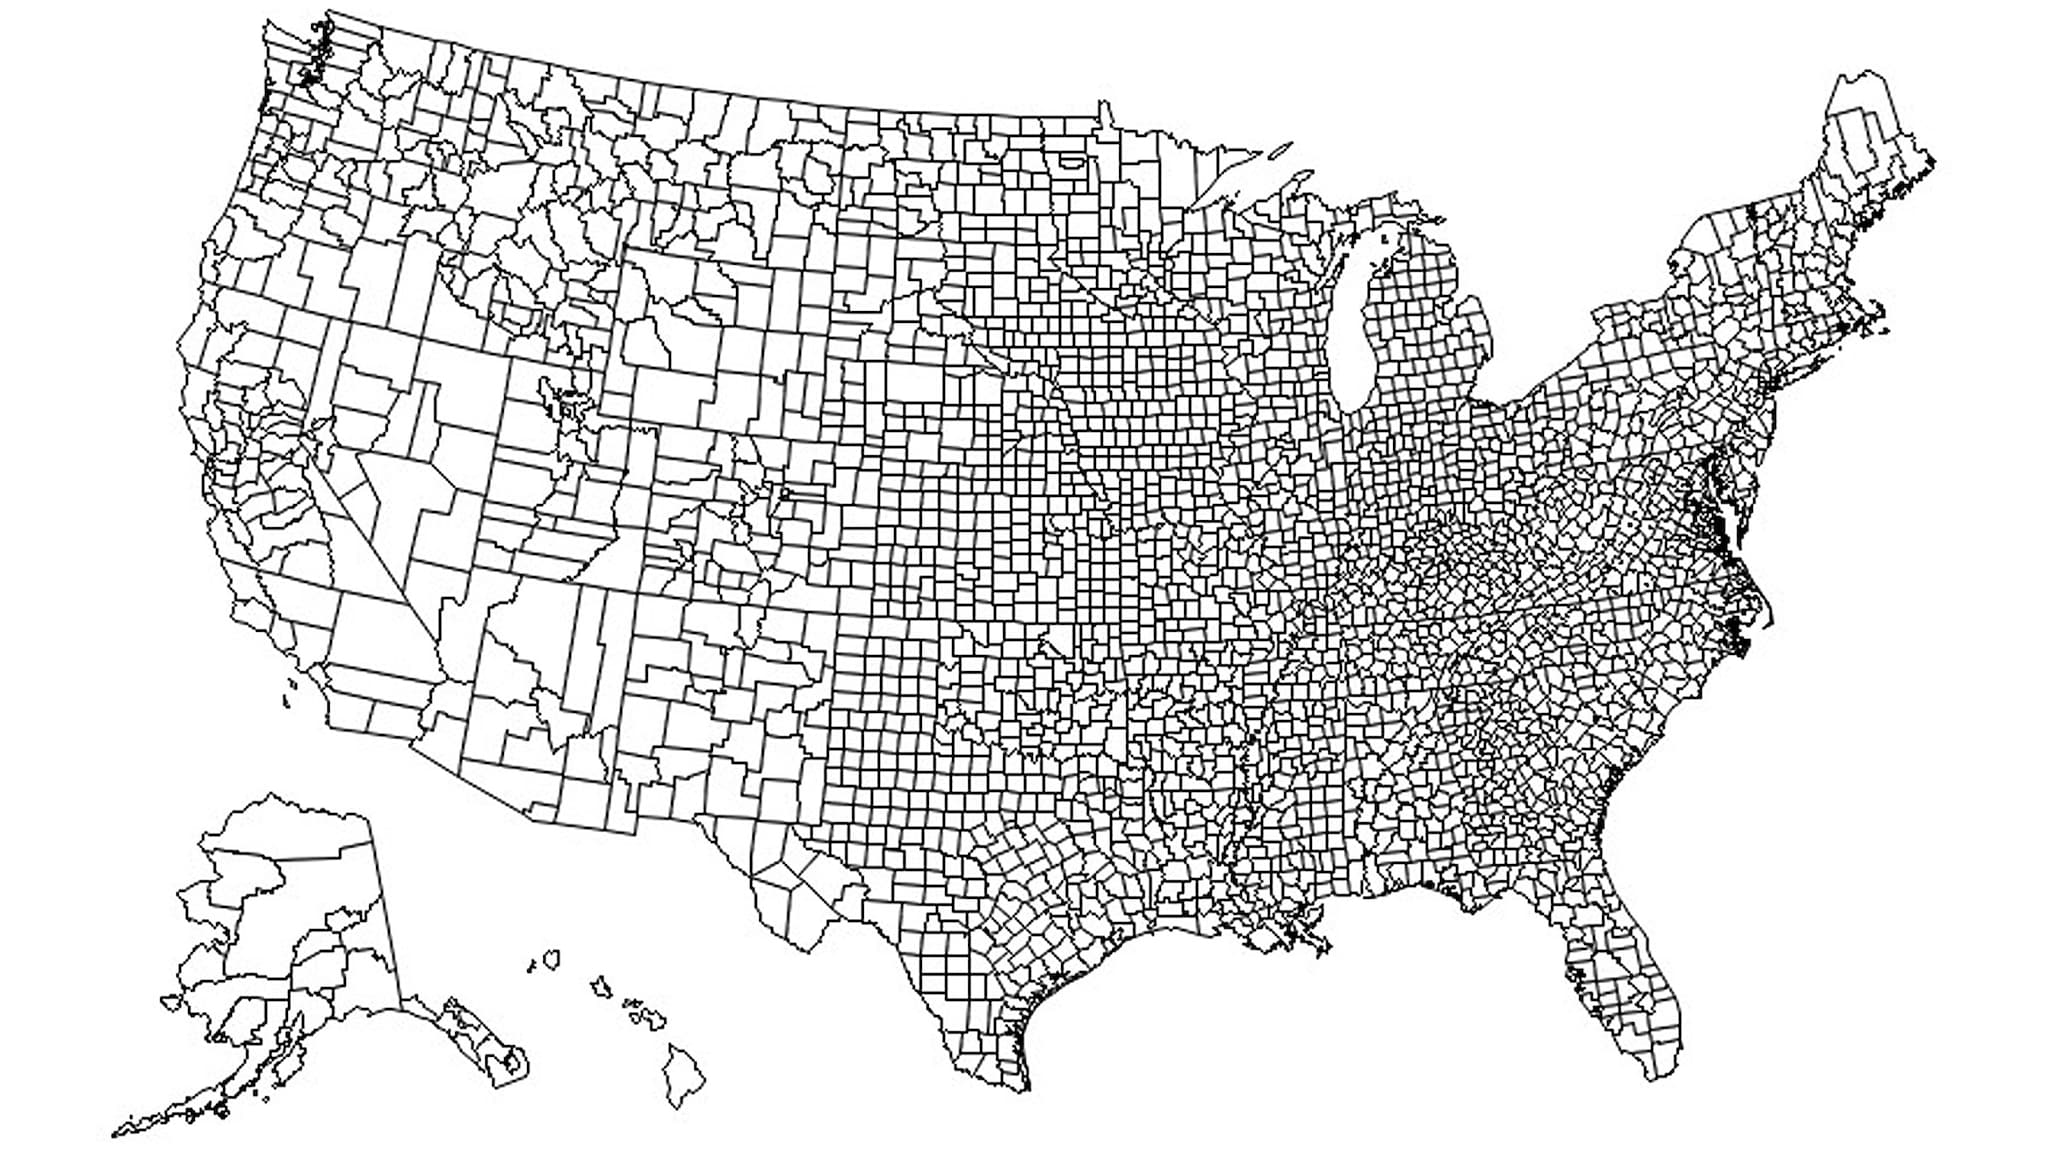 Map of the United States showing every county in the country.